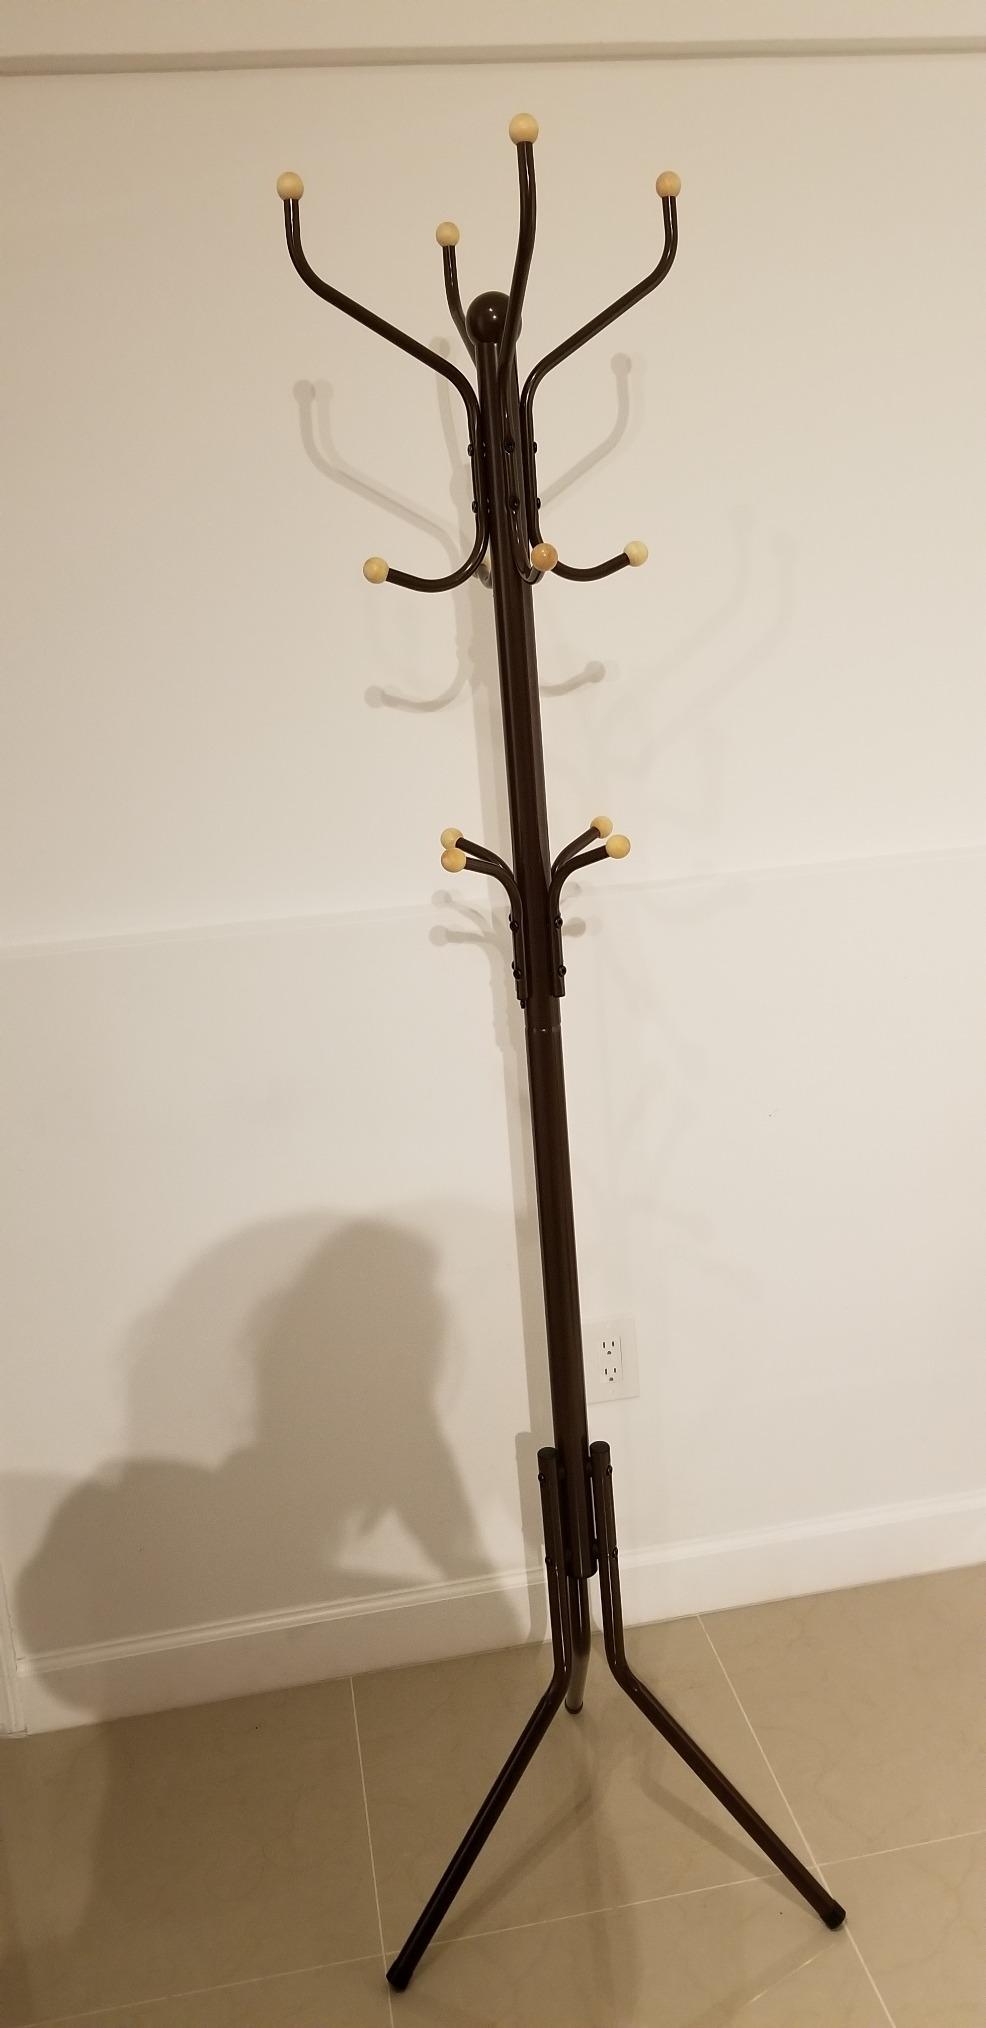 Metal Coat Rack 12 Hooks Display Hall Tree for Clothes Hats and Bags Brown